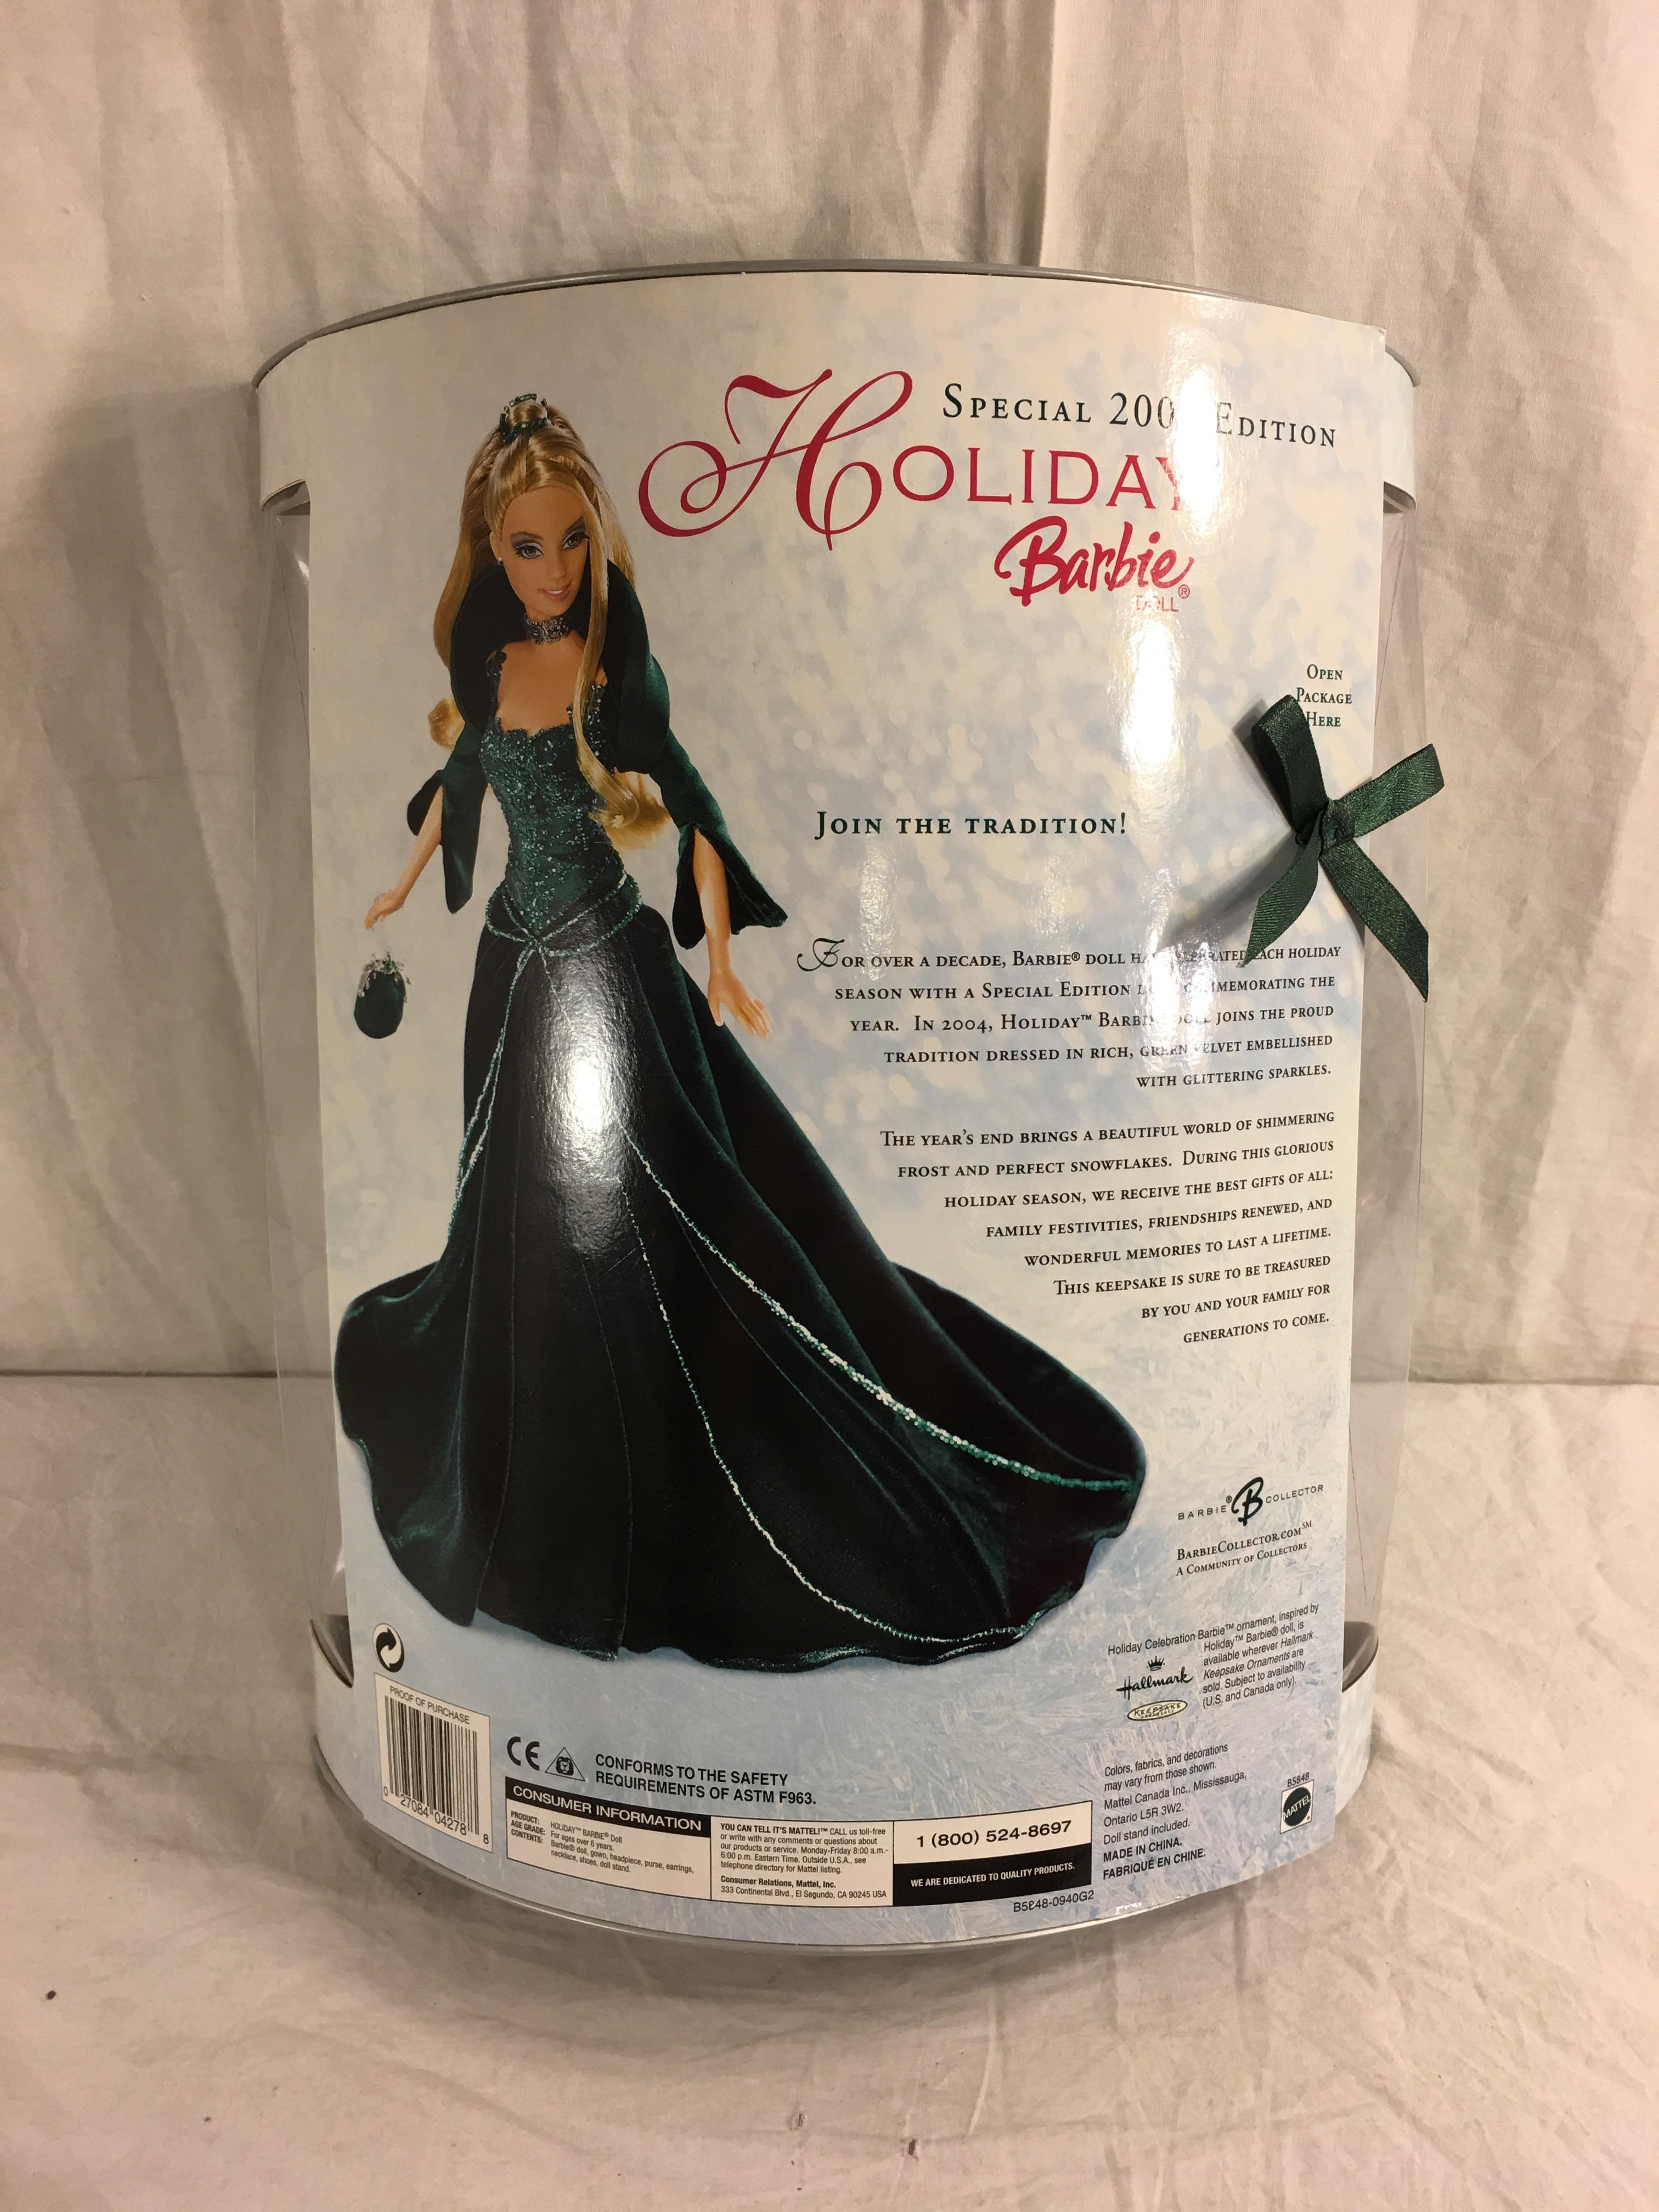 NIB Barbie Mattel Collector Special Edition 2004 Holiday Barbie Doll 13.5"Tall Box Size